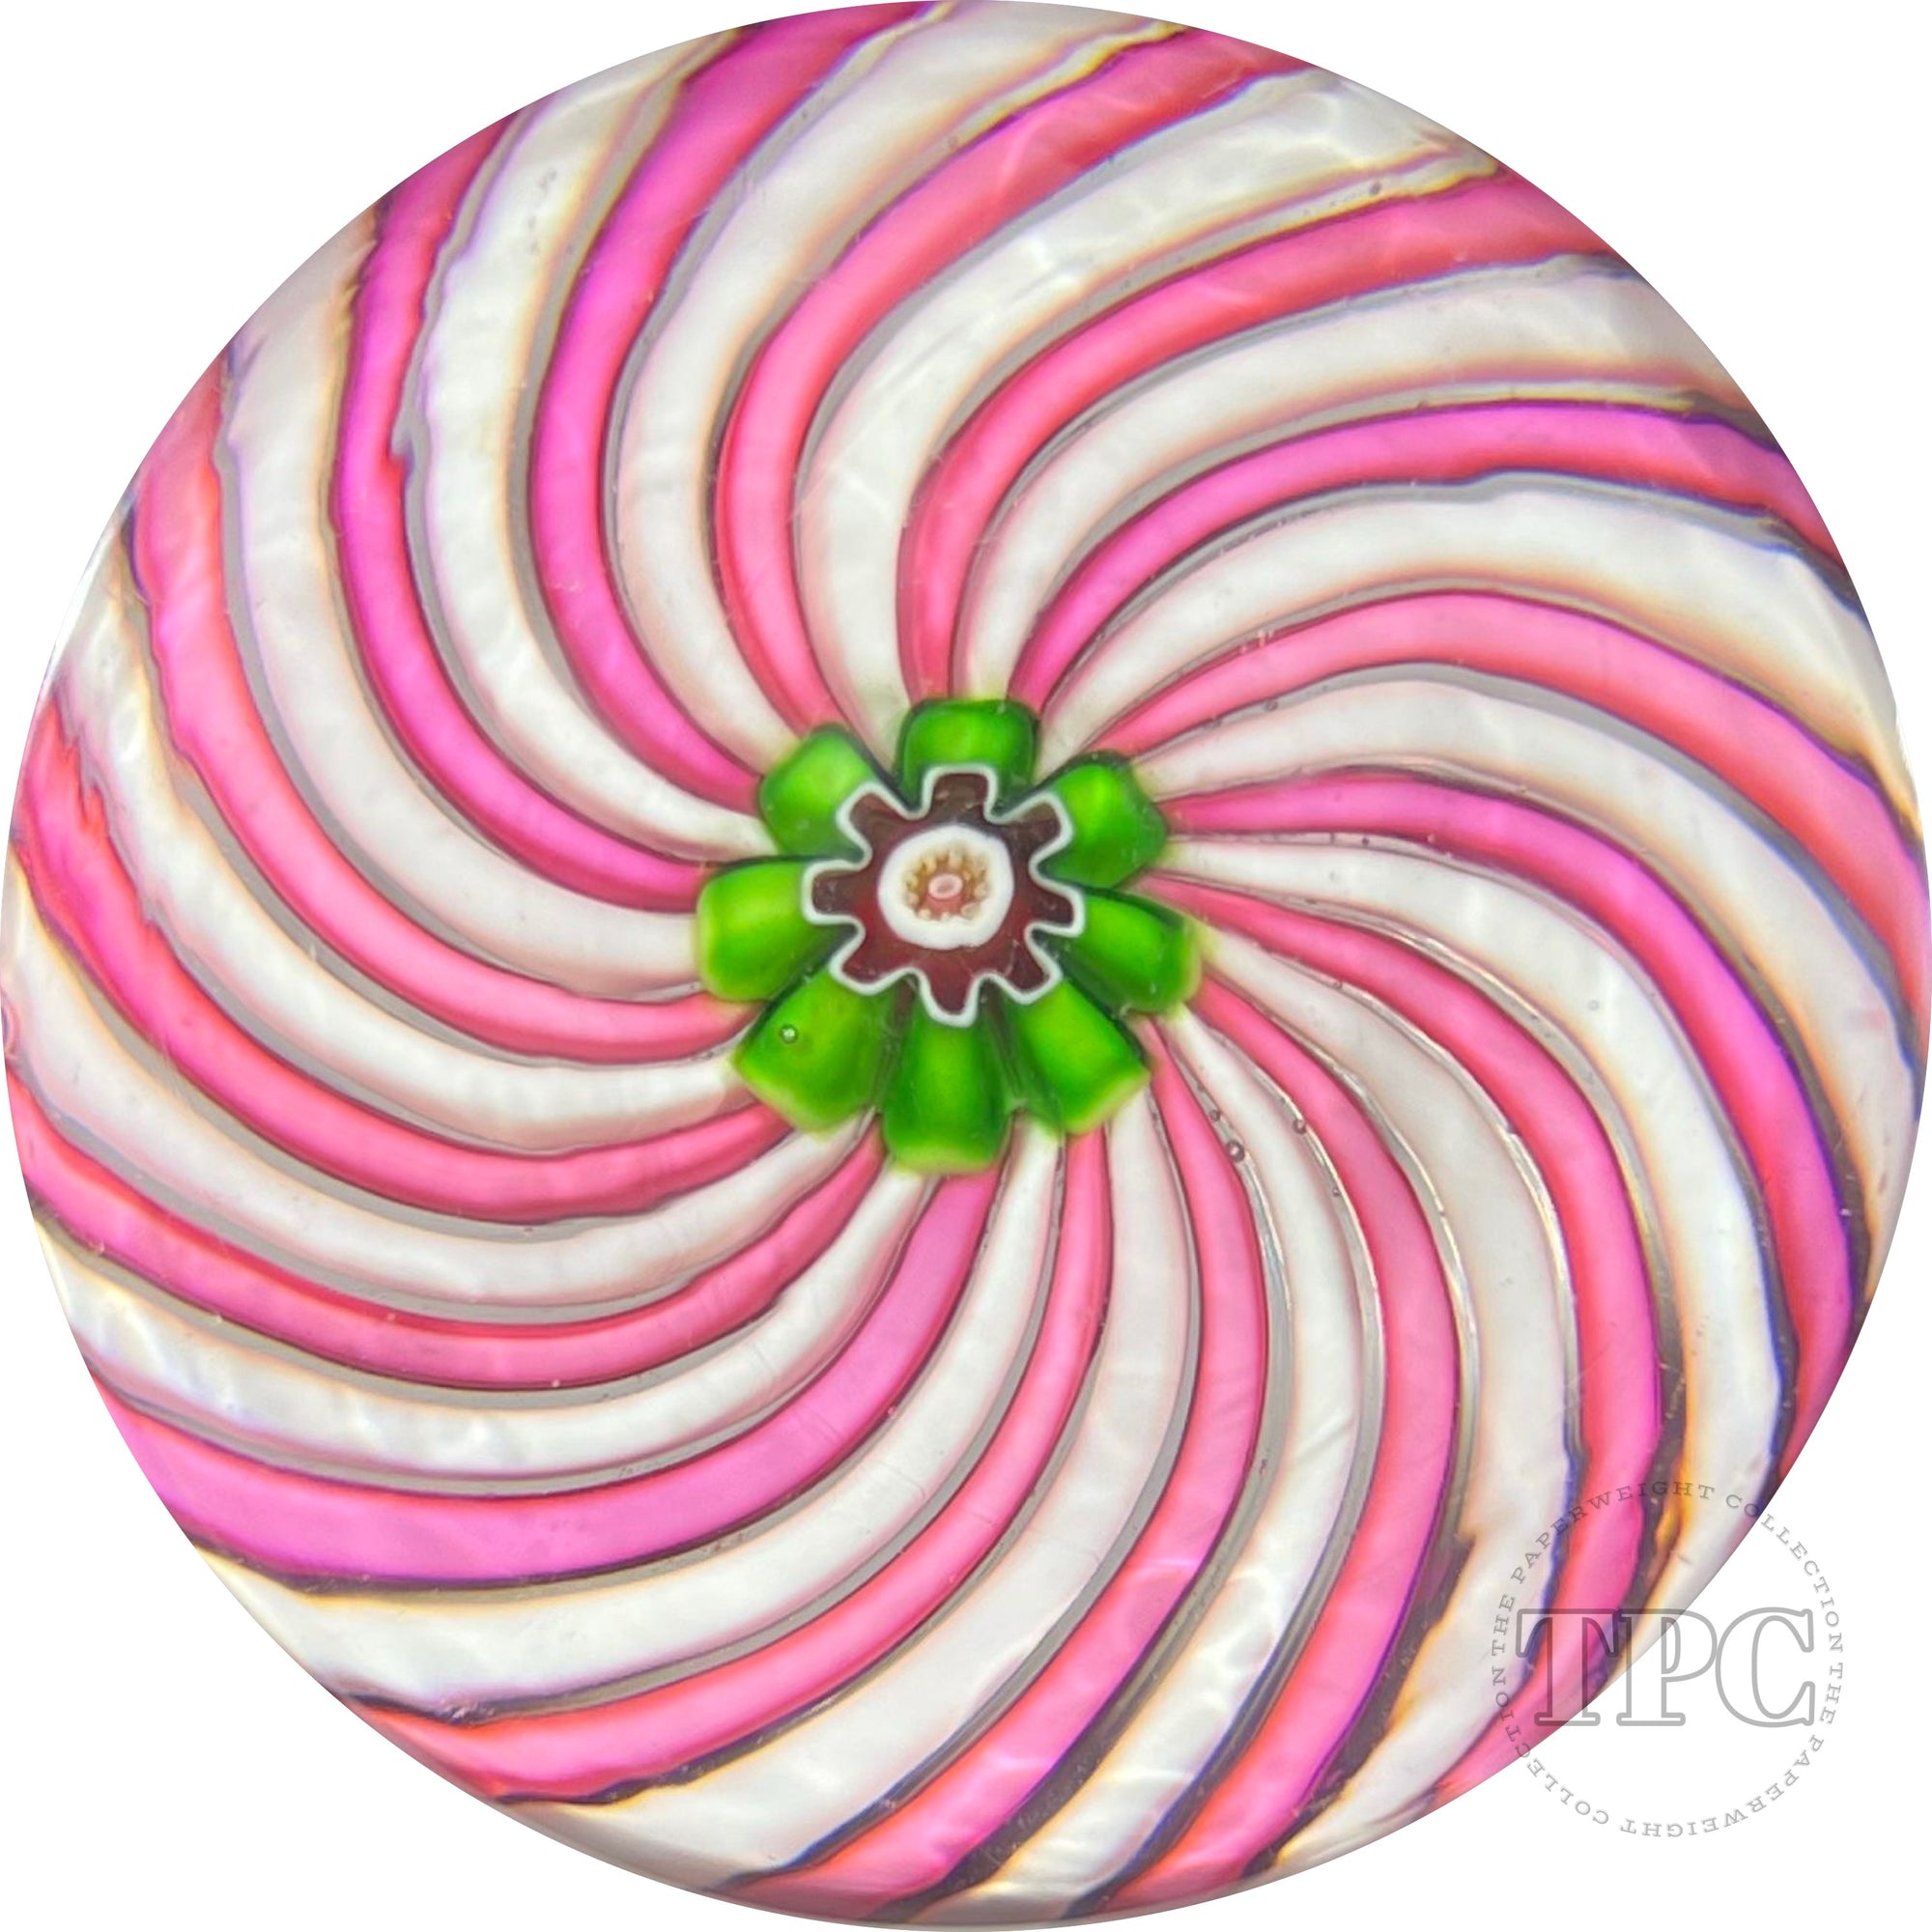 Antique Clichy Glass Art Paperweight Pink and Green Swirl with Green Millefiori Center